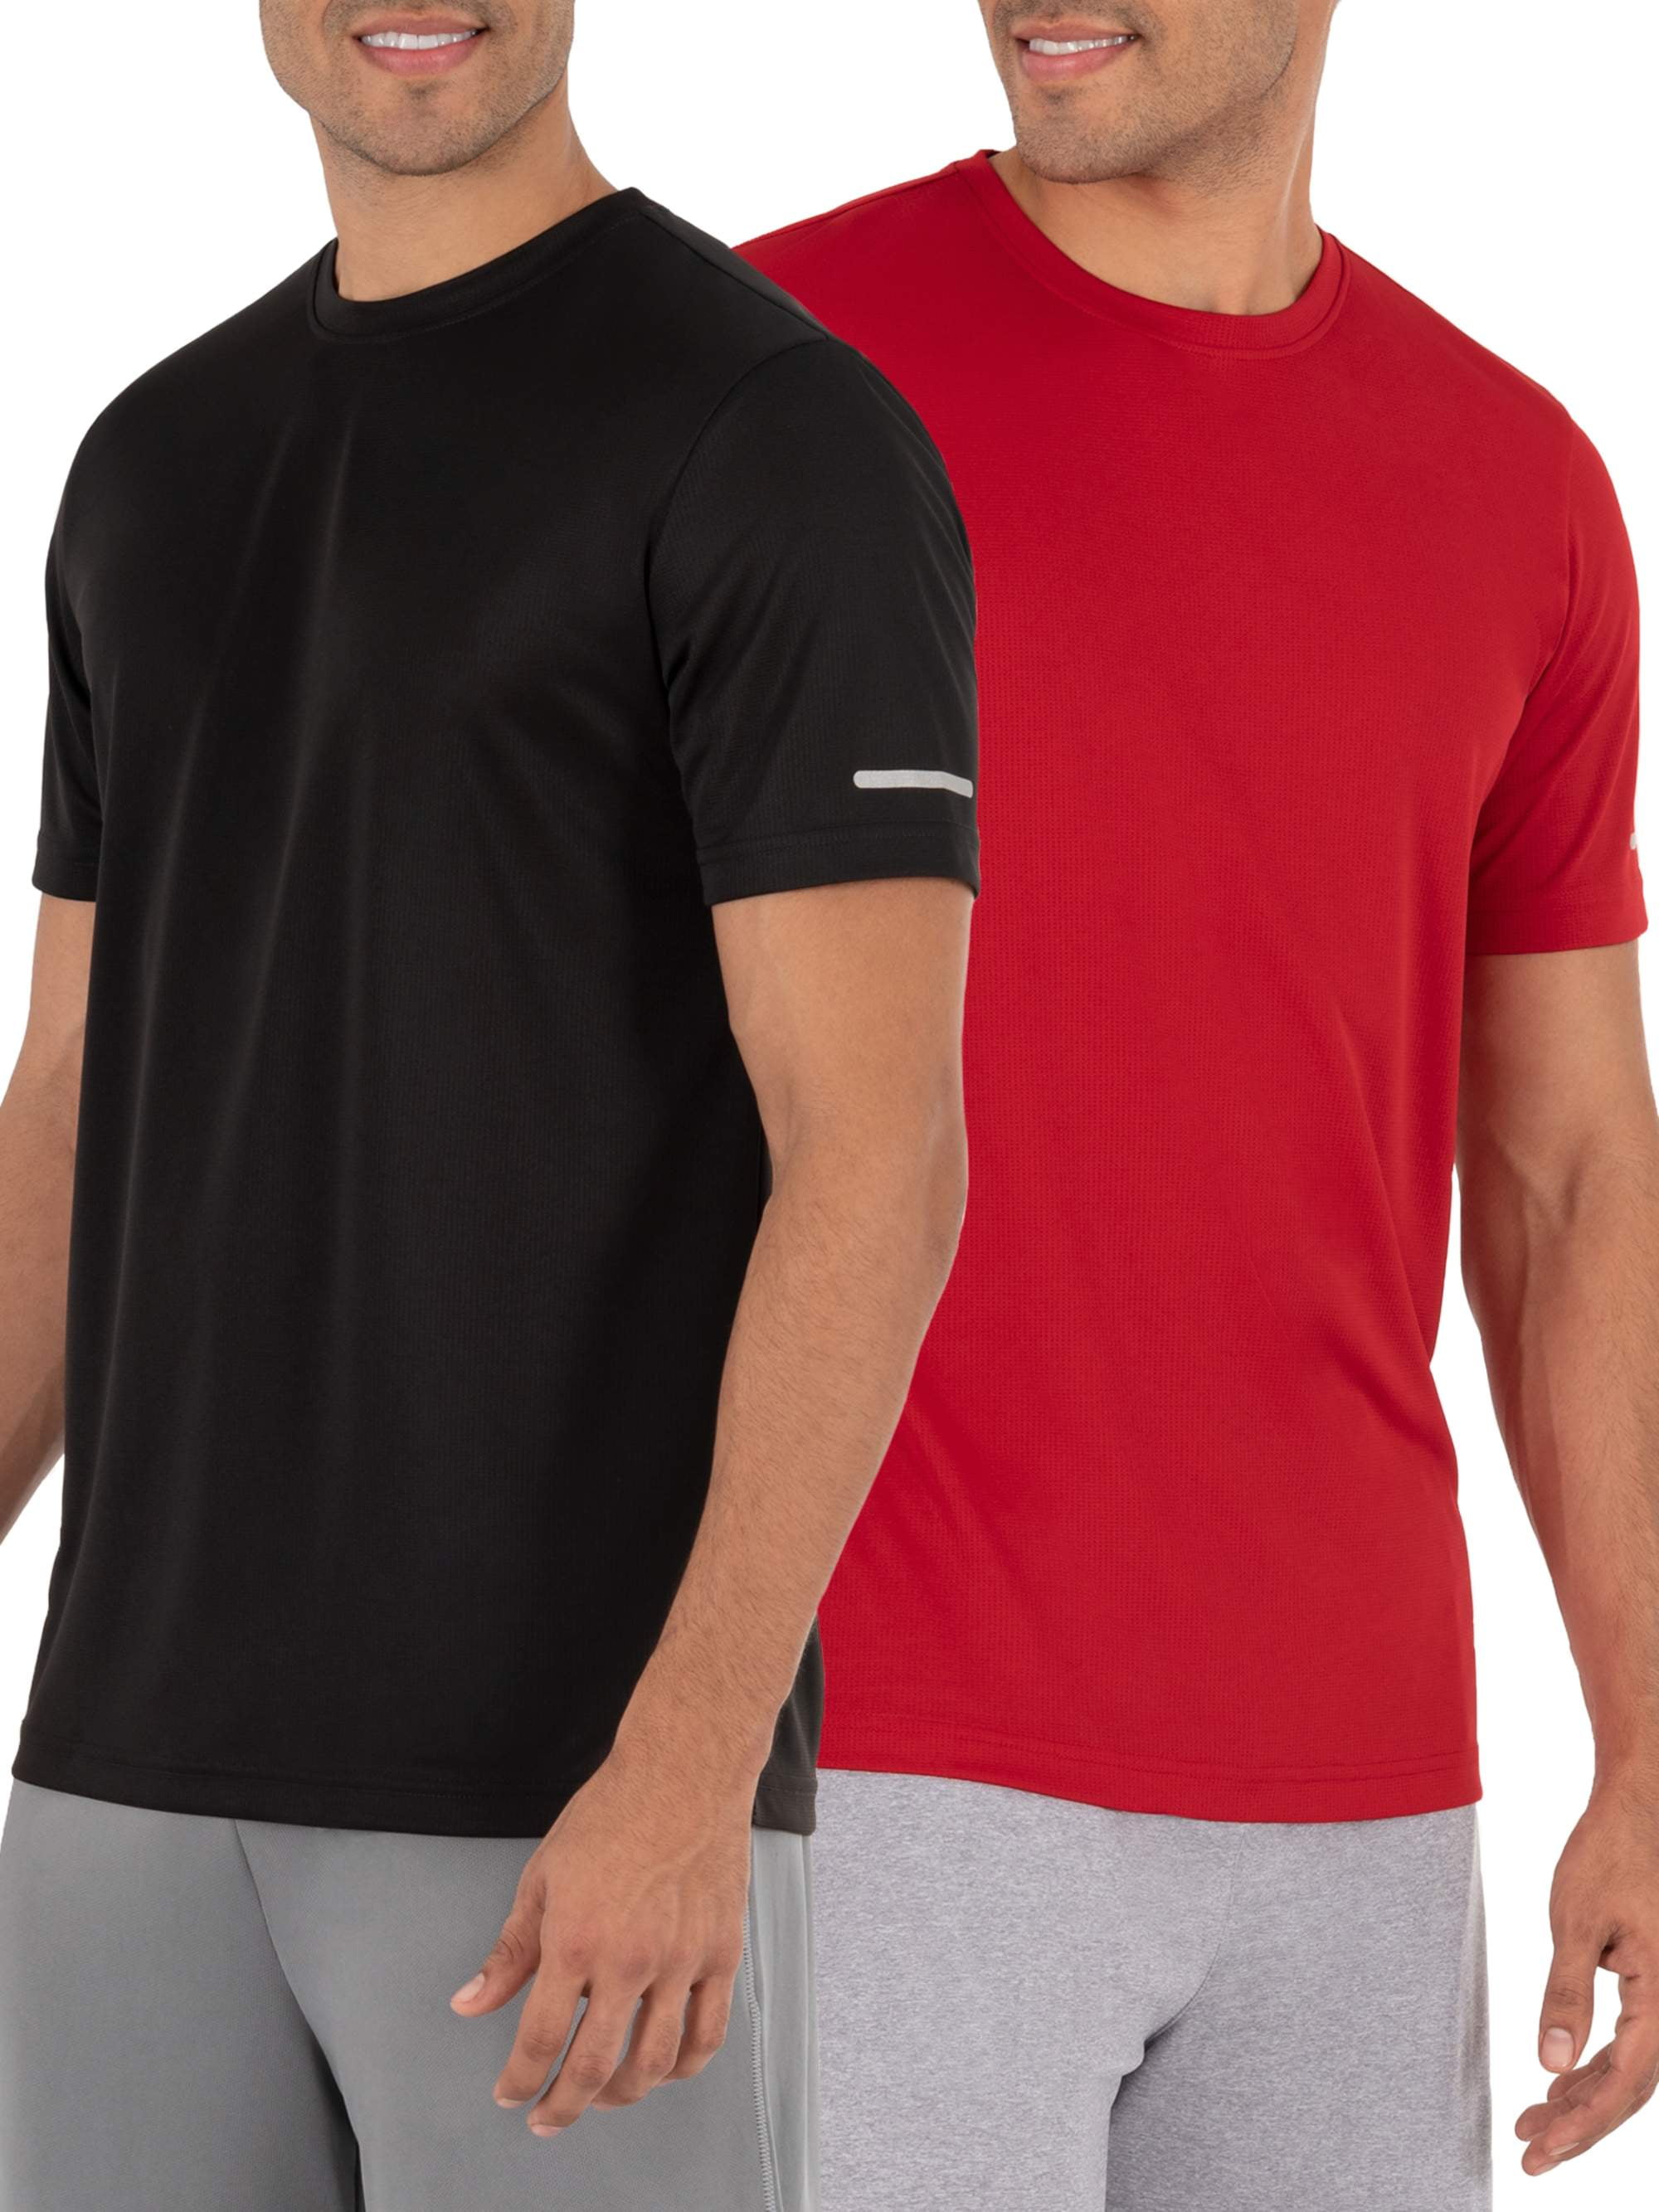 Athletic Works - Athletic Works Men's and Big Men's Quick Dry Tee 2PK ...